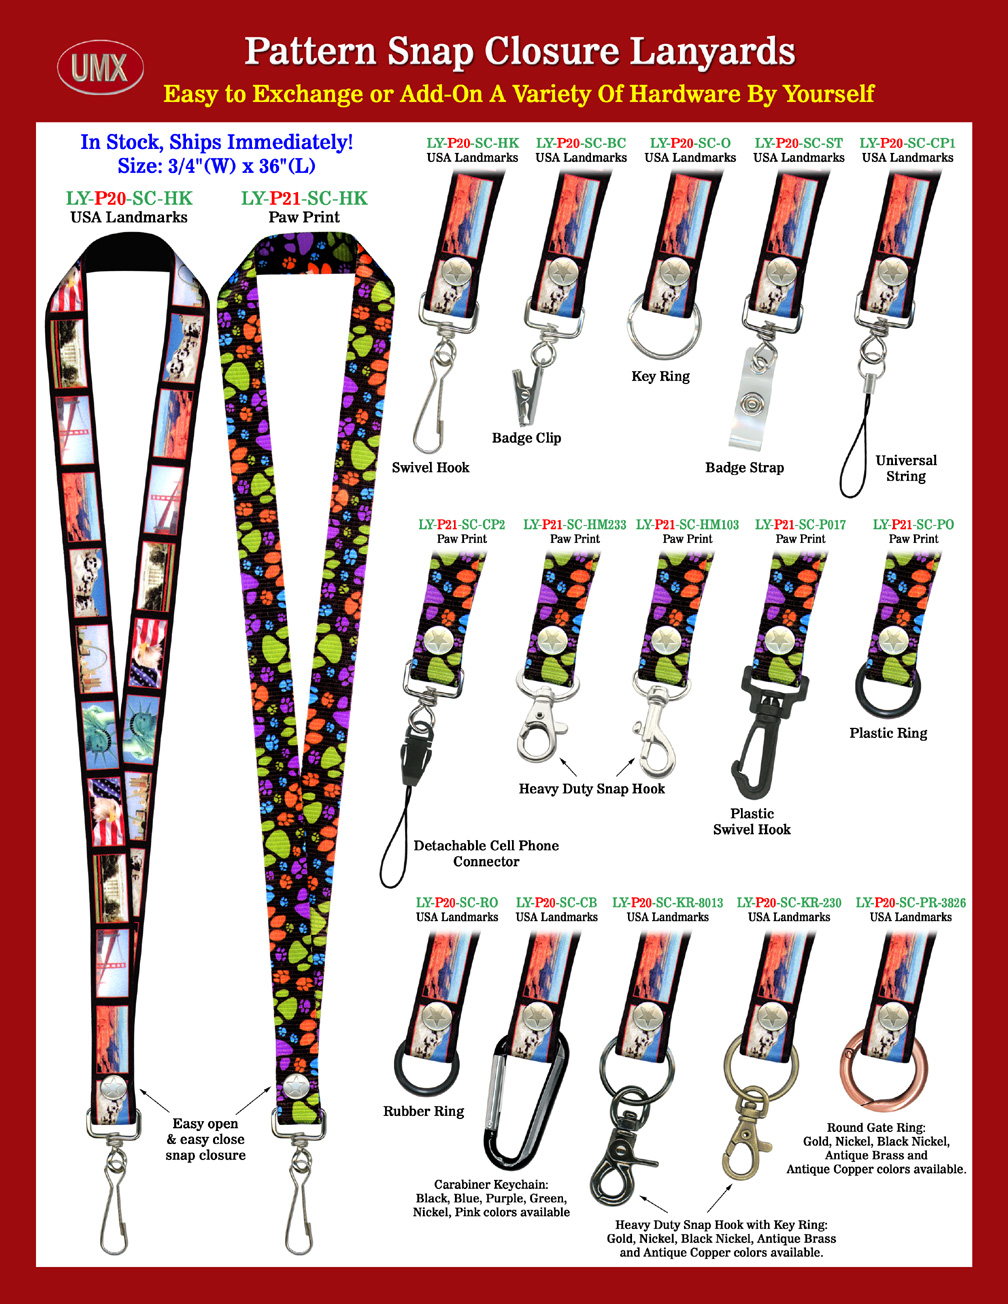 3/4" Easy-Snap-On Lanyards with USA-Landmark and Paw-Print Theme Pre-Printed.